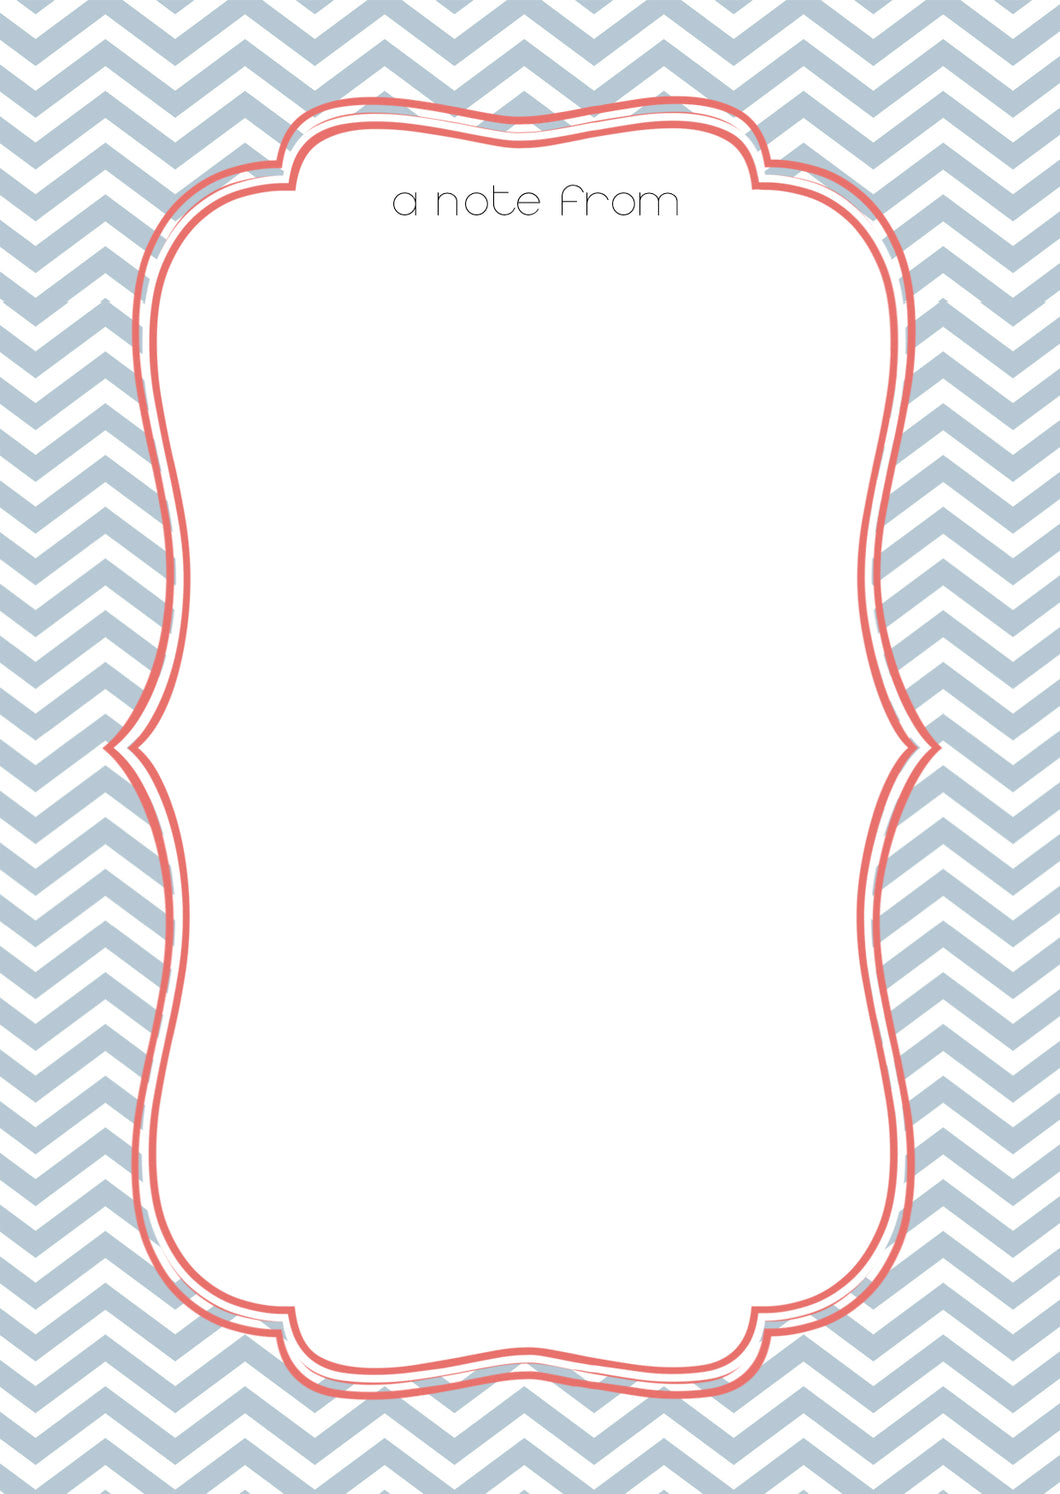 personalised blue trellis design A5 note pad